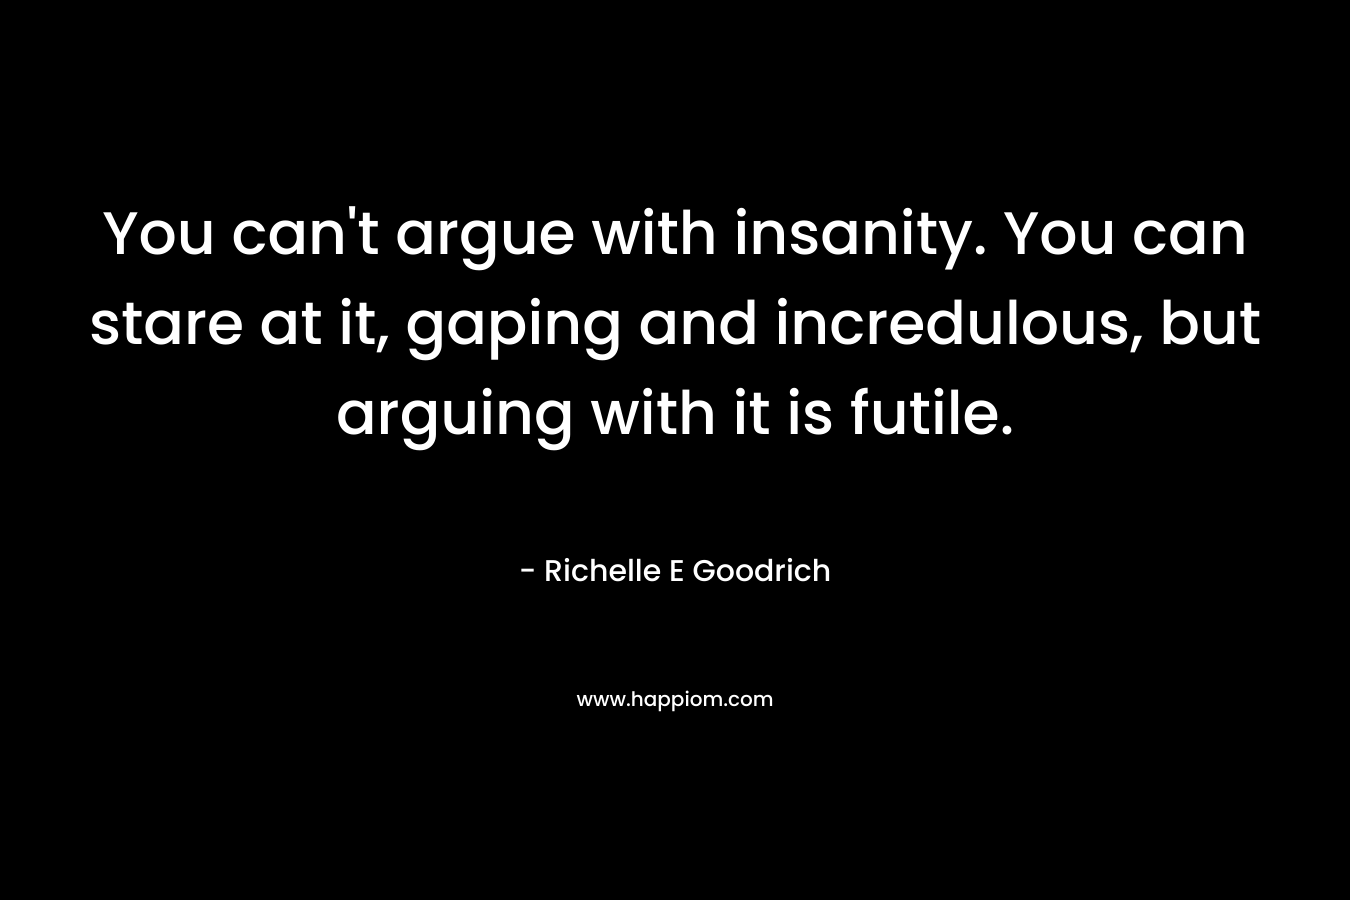 You can’t argue with insanity. You can stare at it, gaping and incredulous, but arguing with it is futile. – Richelle E Goodrich